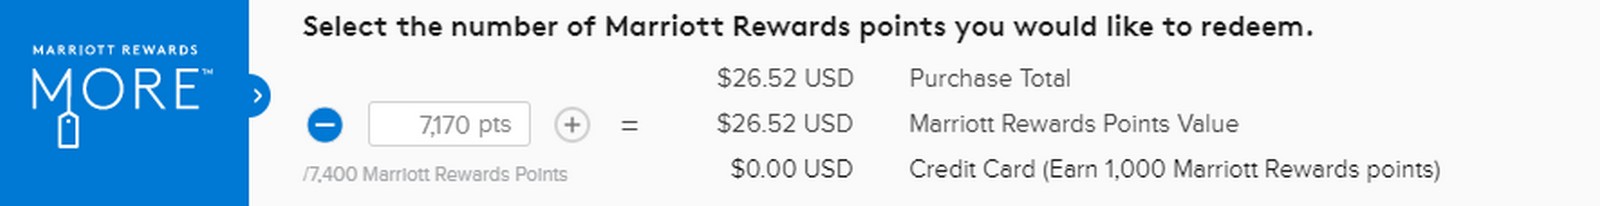 Marriott Rewards More Overview and Review